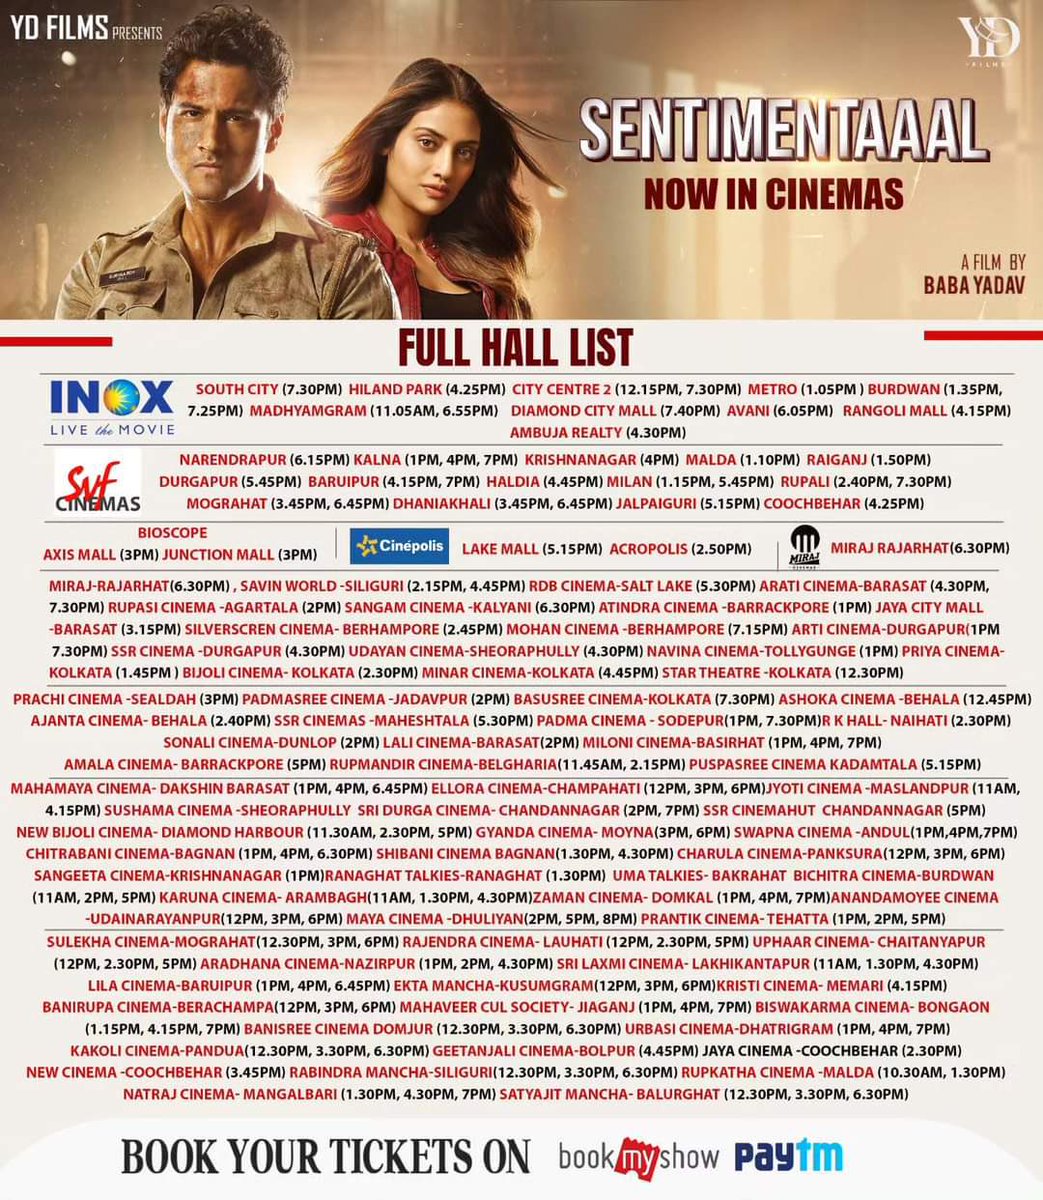 From ours to yours… From #Mentaaal to #Sentimentaaal it’s yours now at your nearest cinema hall… Show your love ❤️